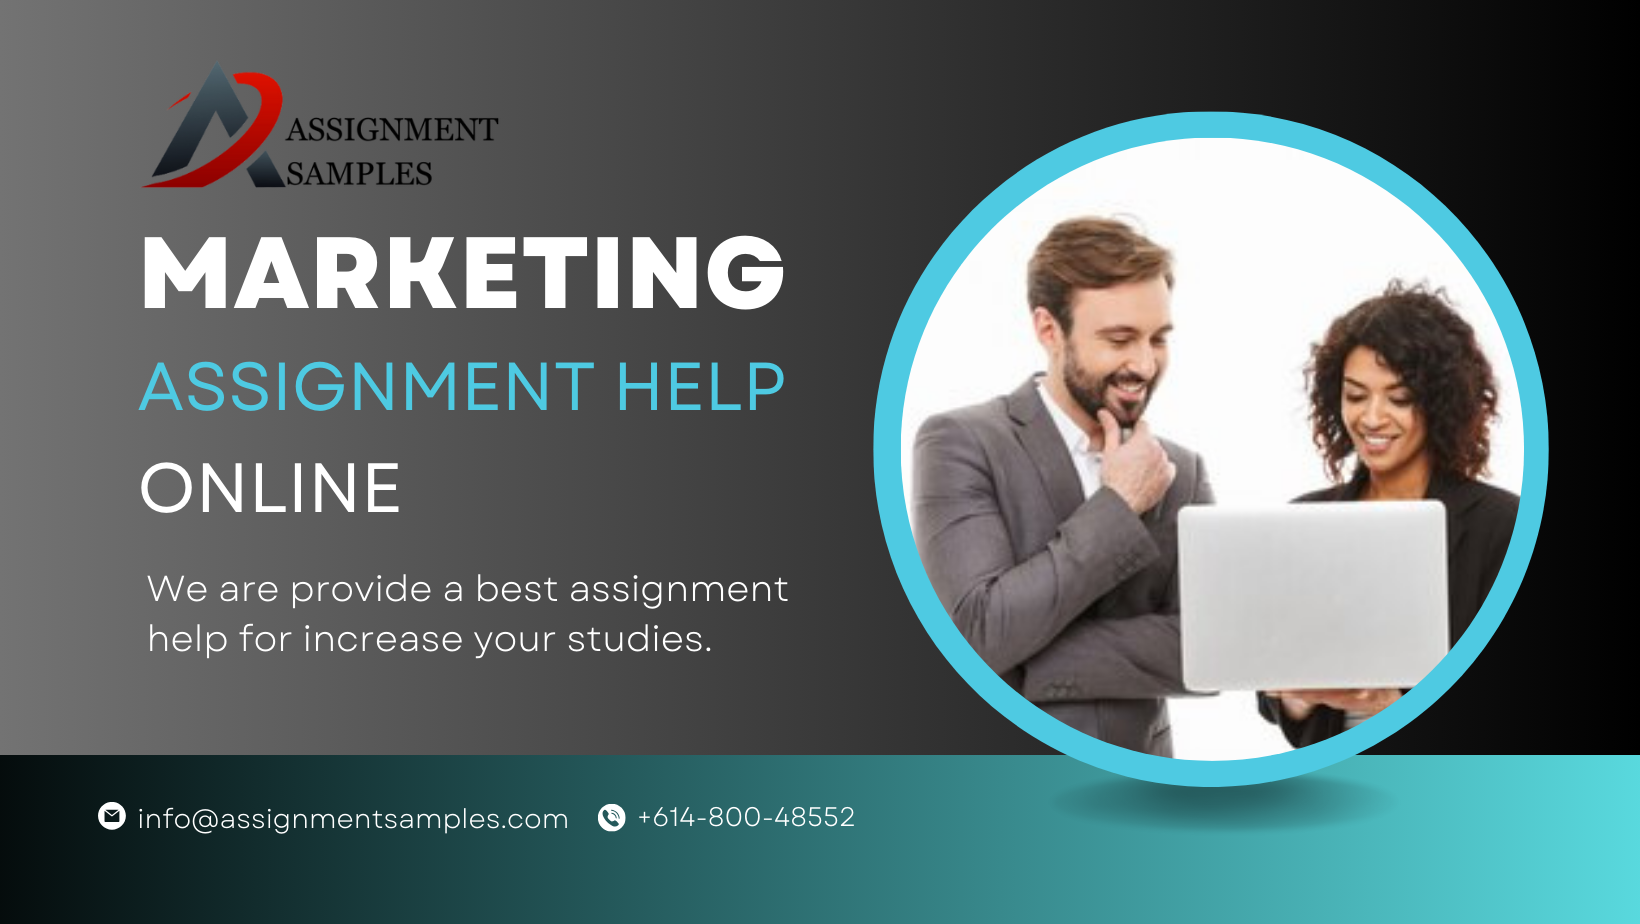 Exploring Marketing Assignment Help and Assignment Help in Australia